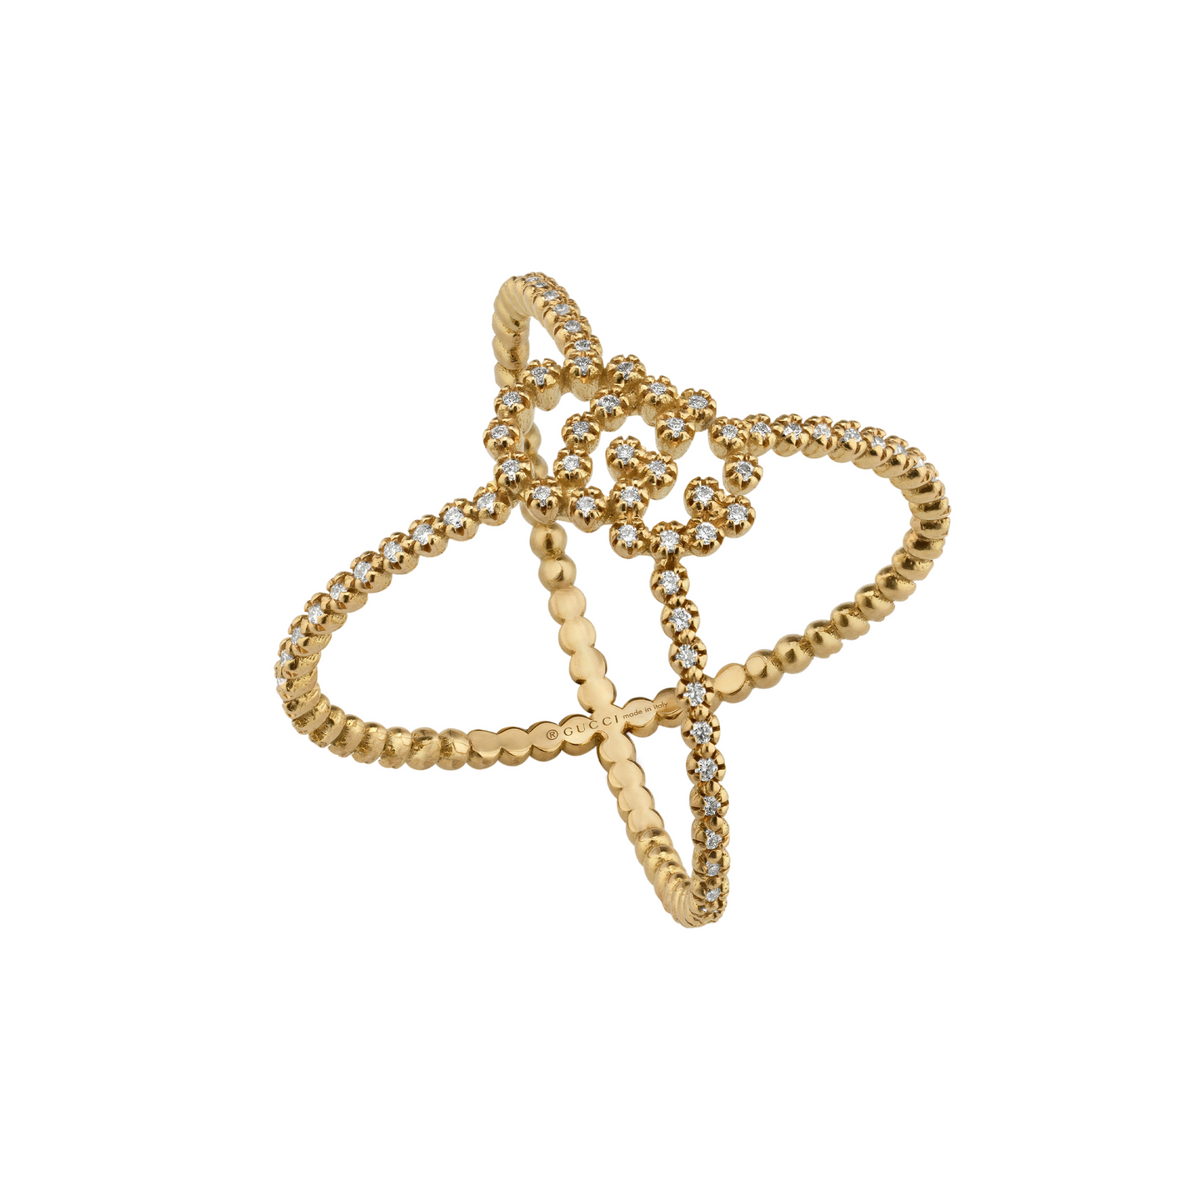 Gucci GG Running Ring in 18k Yellow Gold with Diamonds - Orsini Jewellers NZ